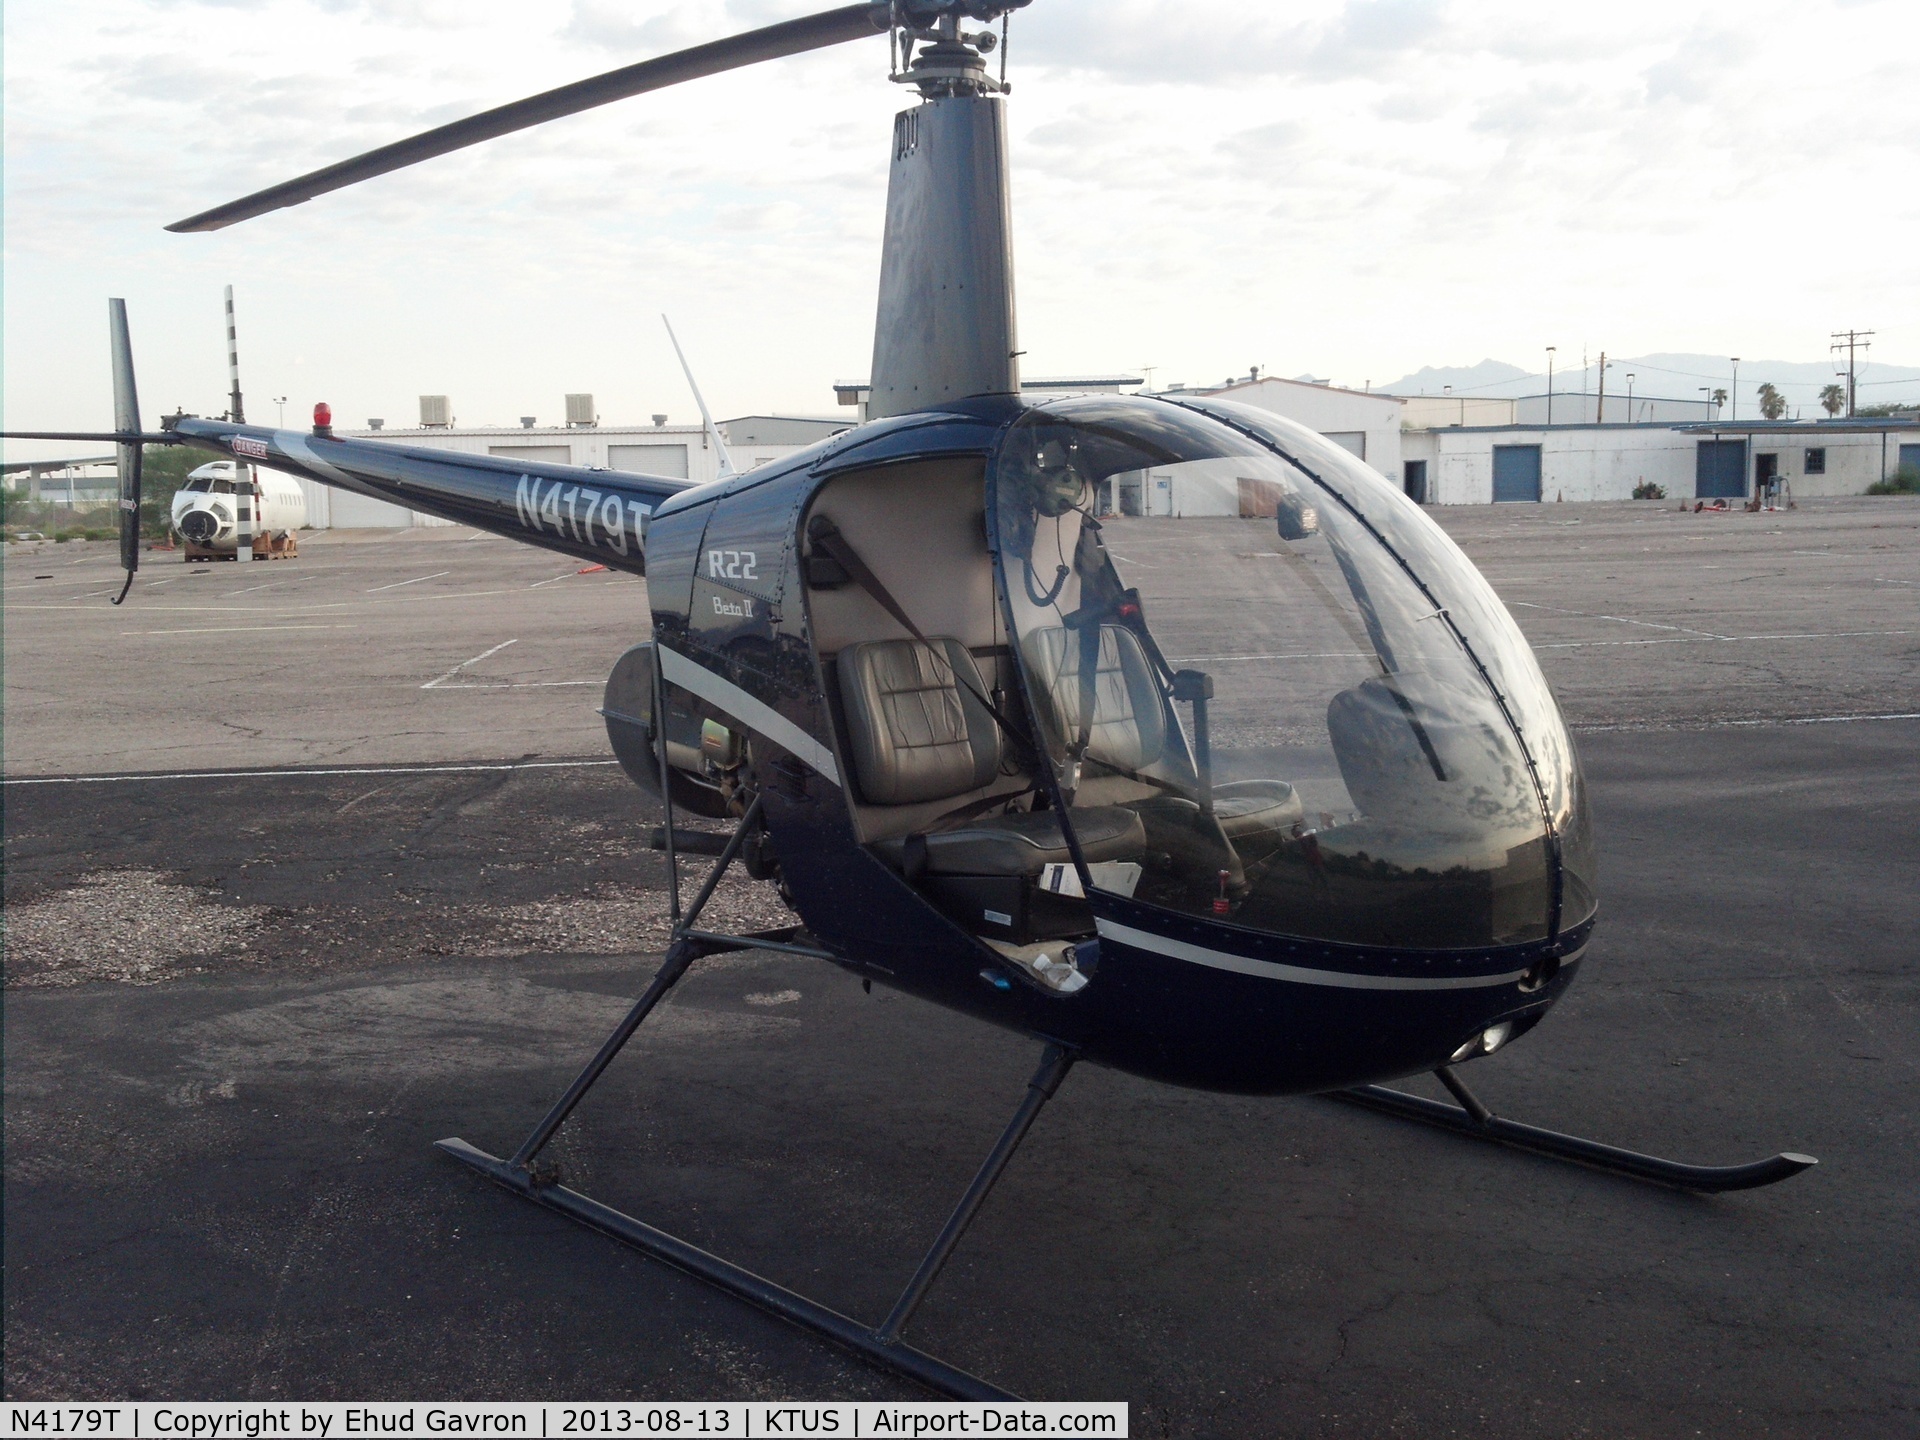 N4179T, 2008 Robinson R22 Beta C/N 4398, N4179T from Scottsdale Heli visiting Southwest Heli in Tucson to drop off a passenger.